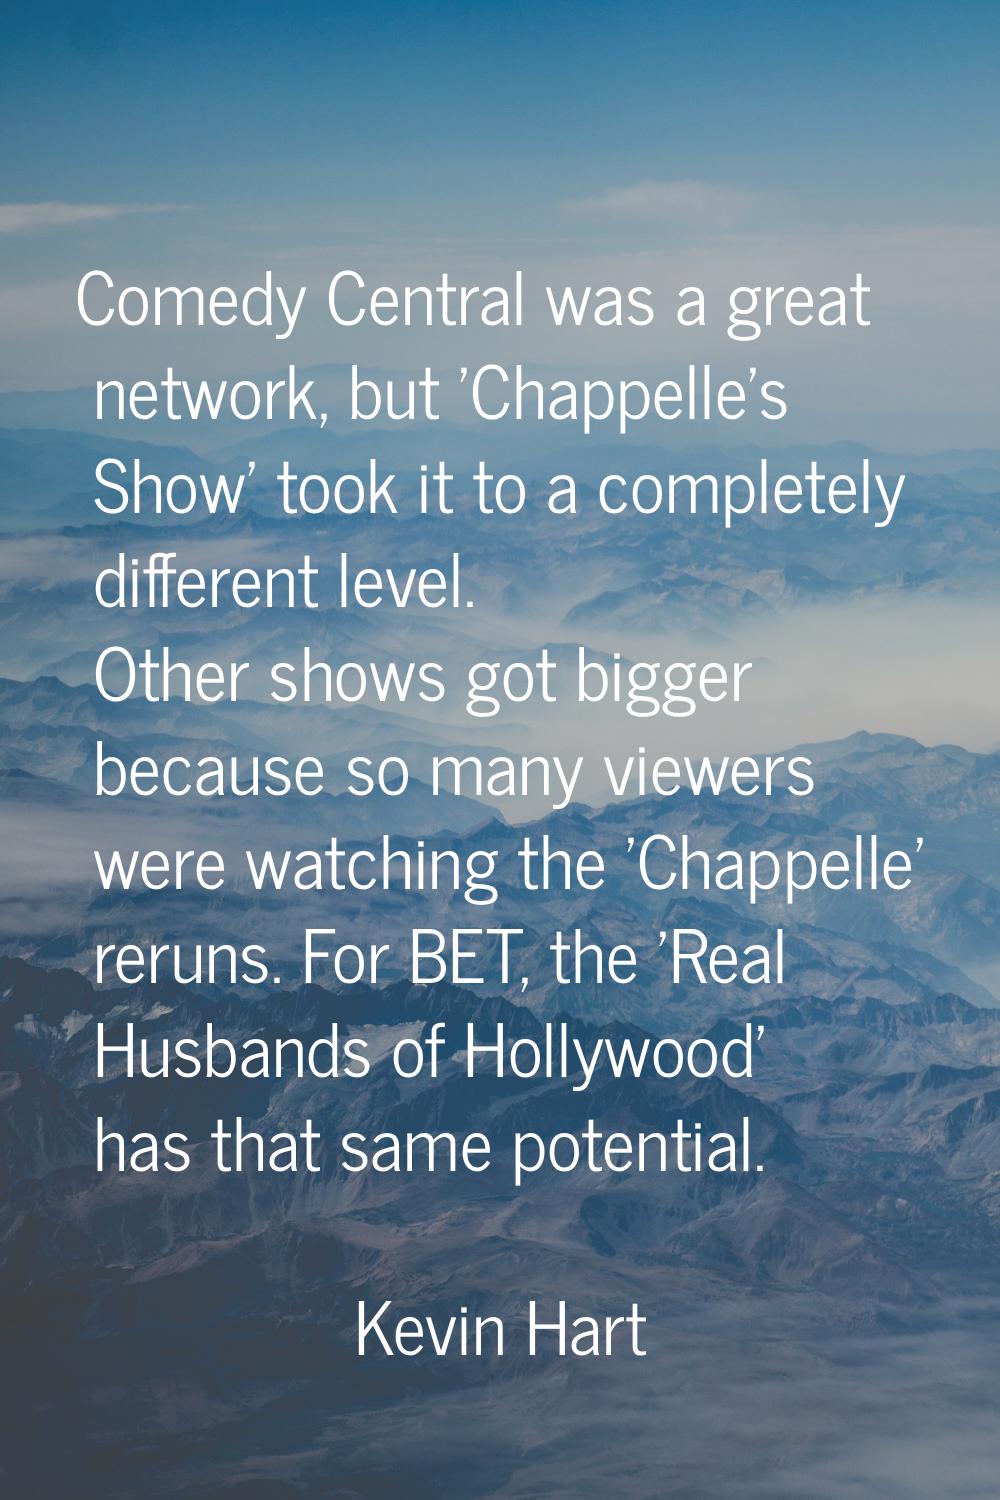 Comedy Central was a great network, but 'Chappelle's Show' took it to a completely different level.